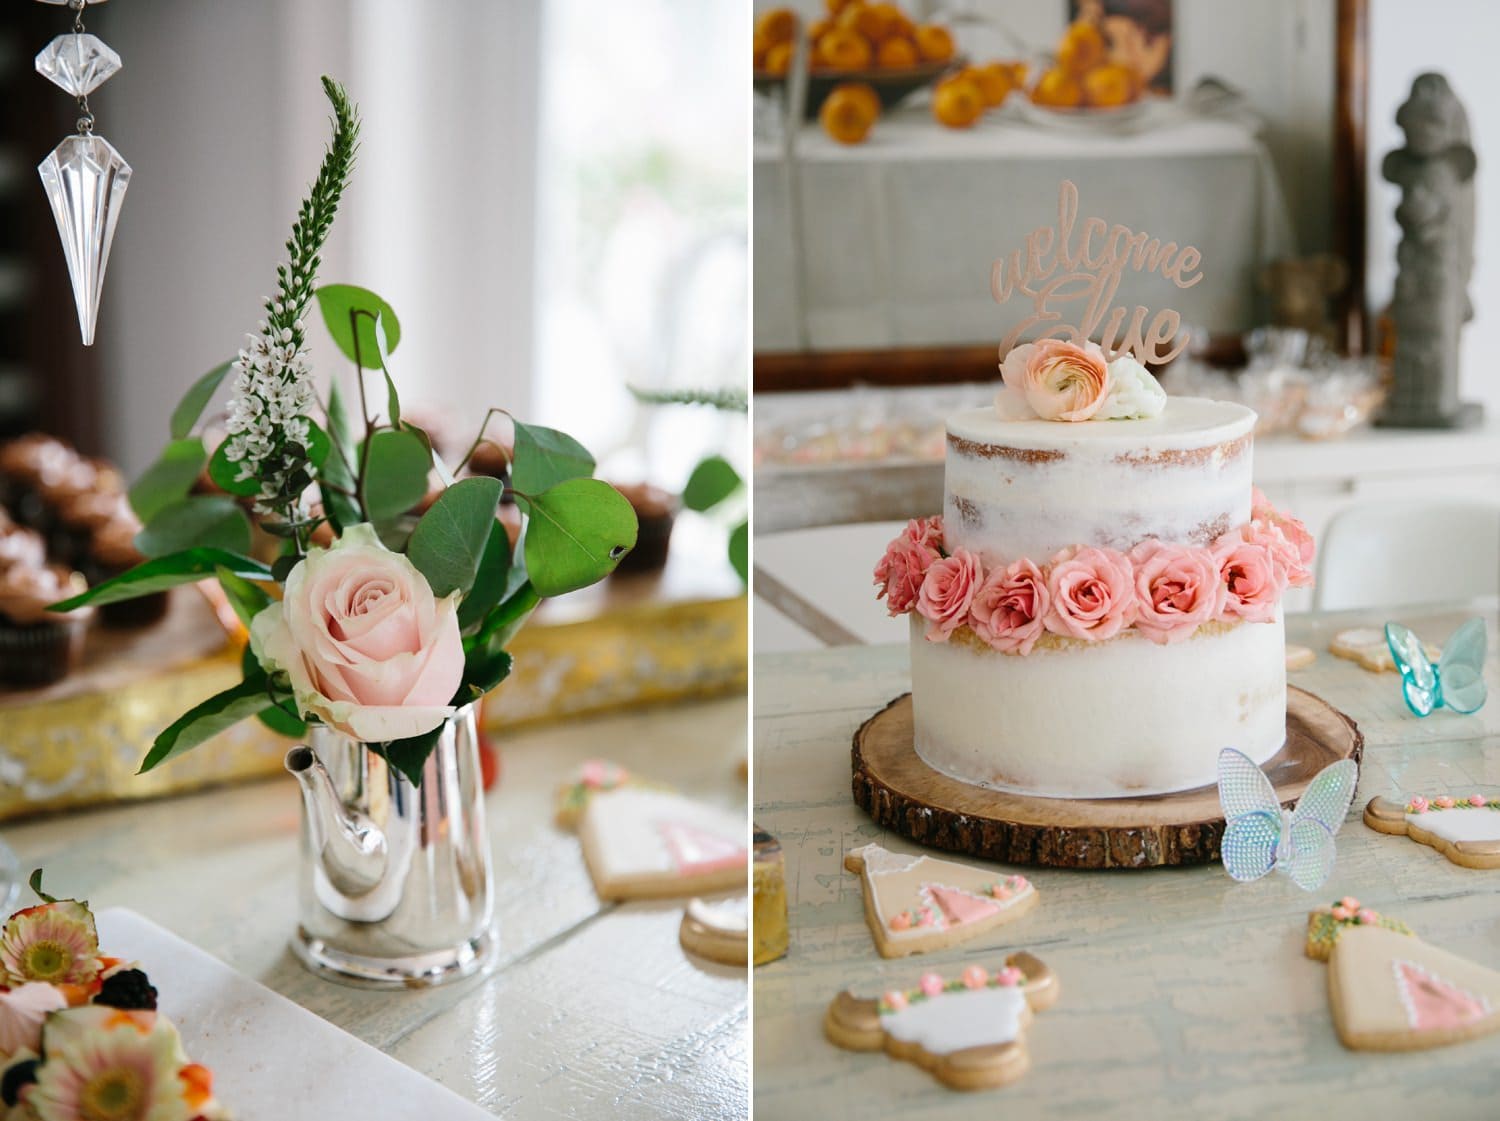 Cake and decoration for a baby shower. Boho Baby Shower. Miami Family Photographer 